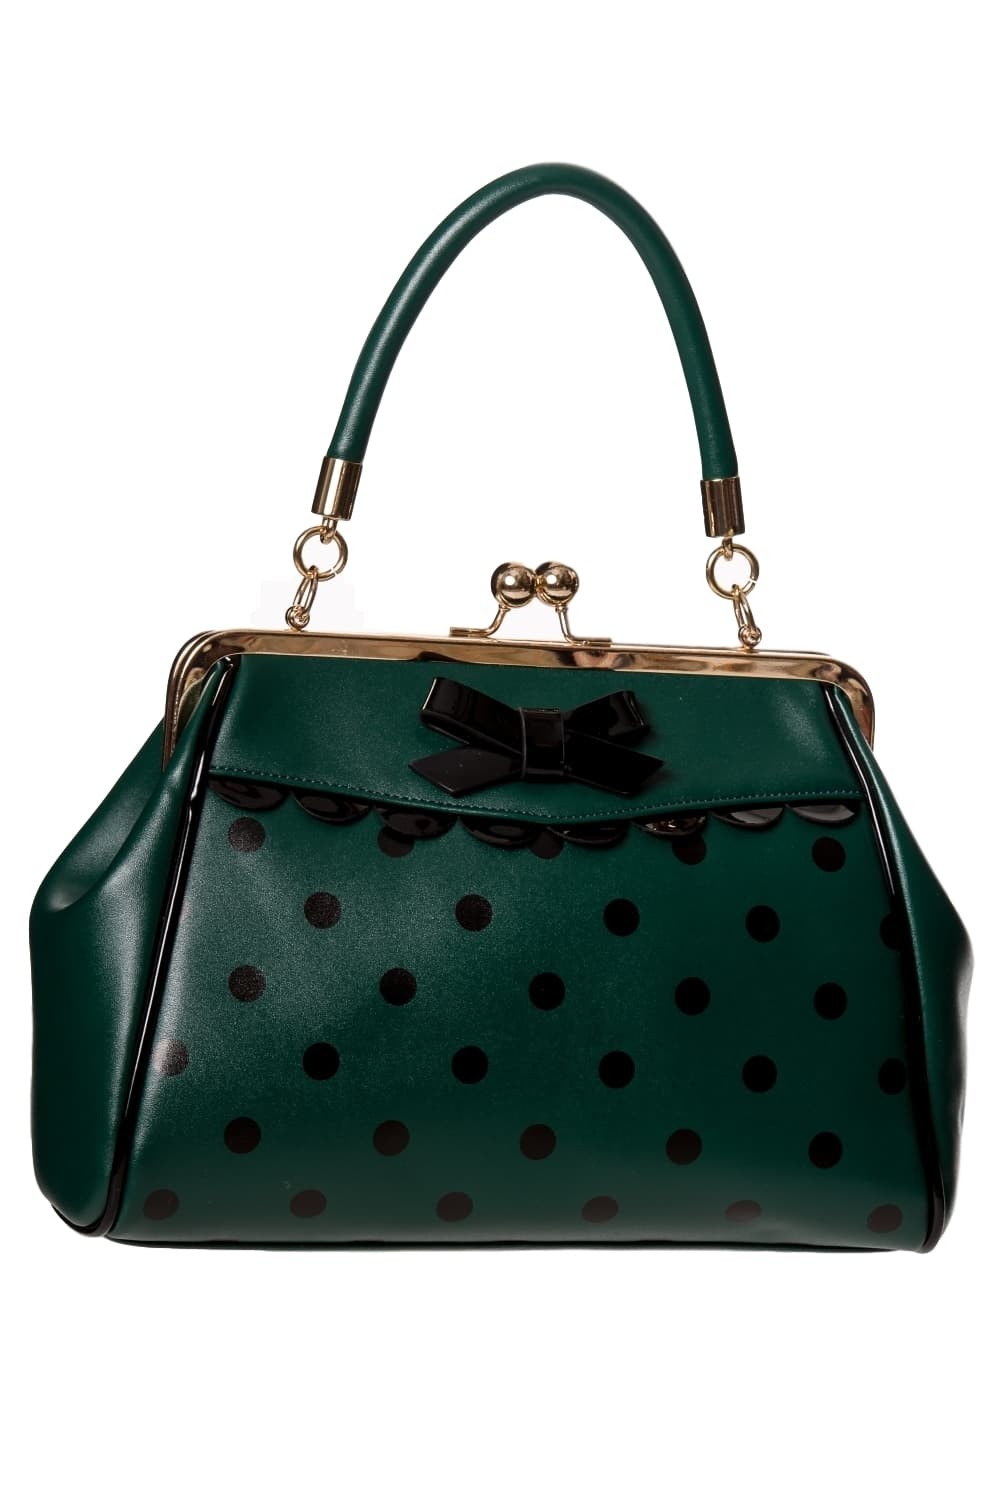 Banned Crazy Little Thing Polka Bag